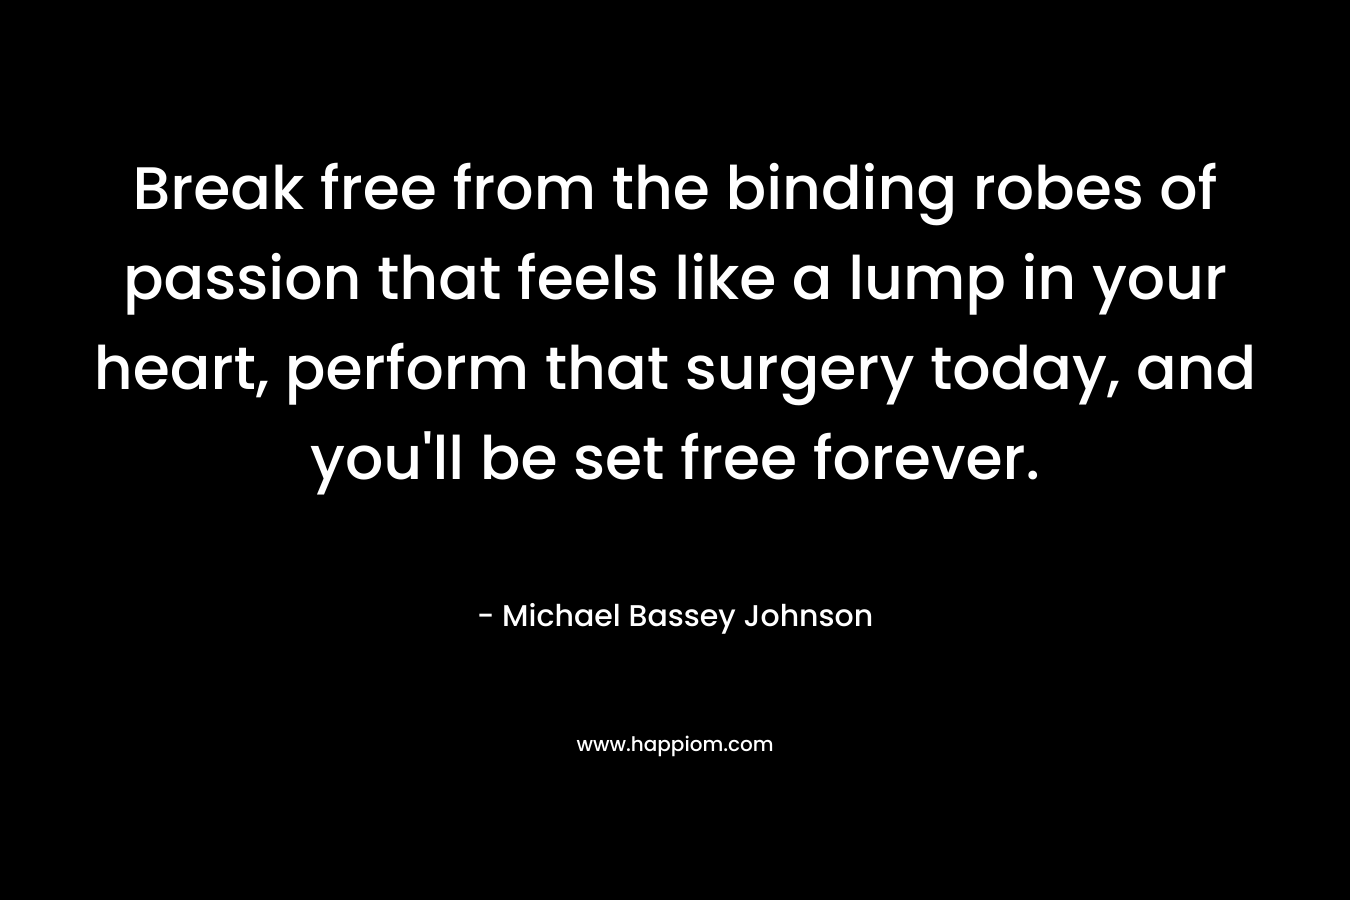 Break free from the binding robes of passion that feels like a lump in your heart, perform that surgery today, and you'll be set free forever.